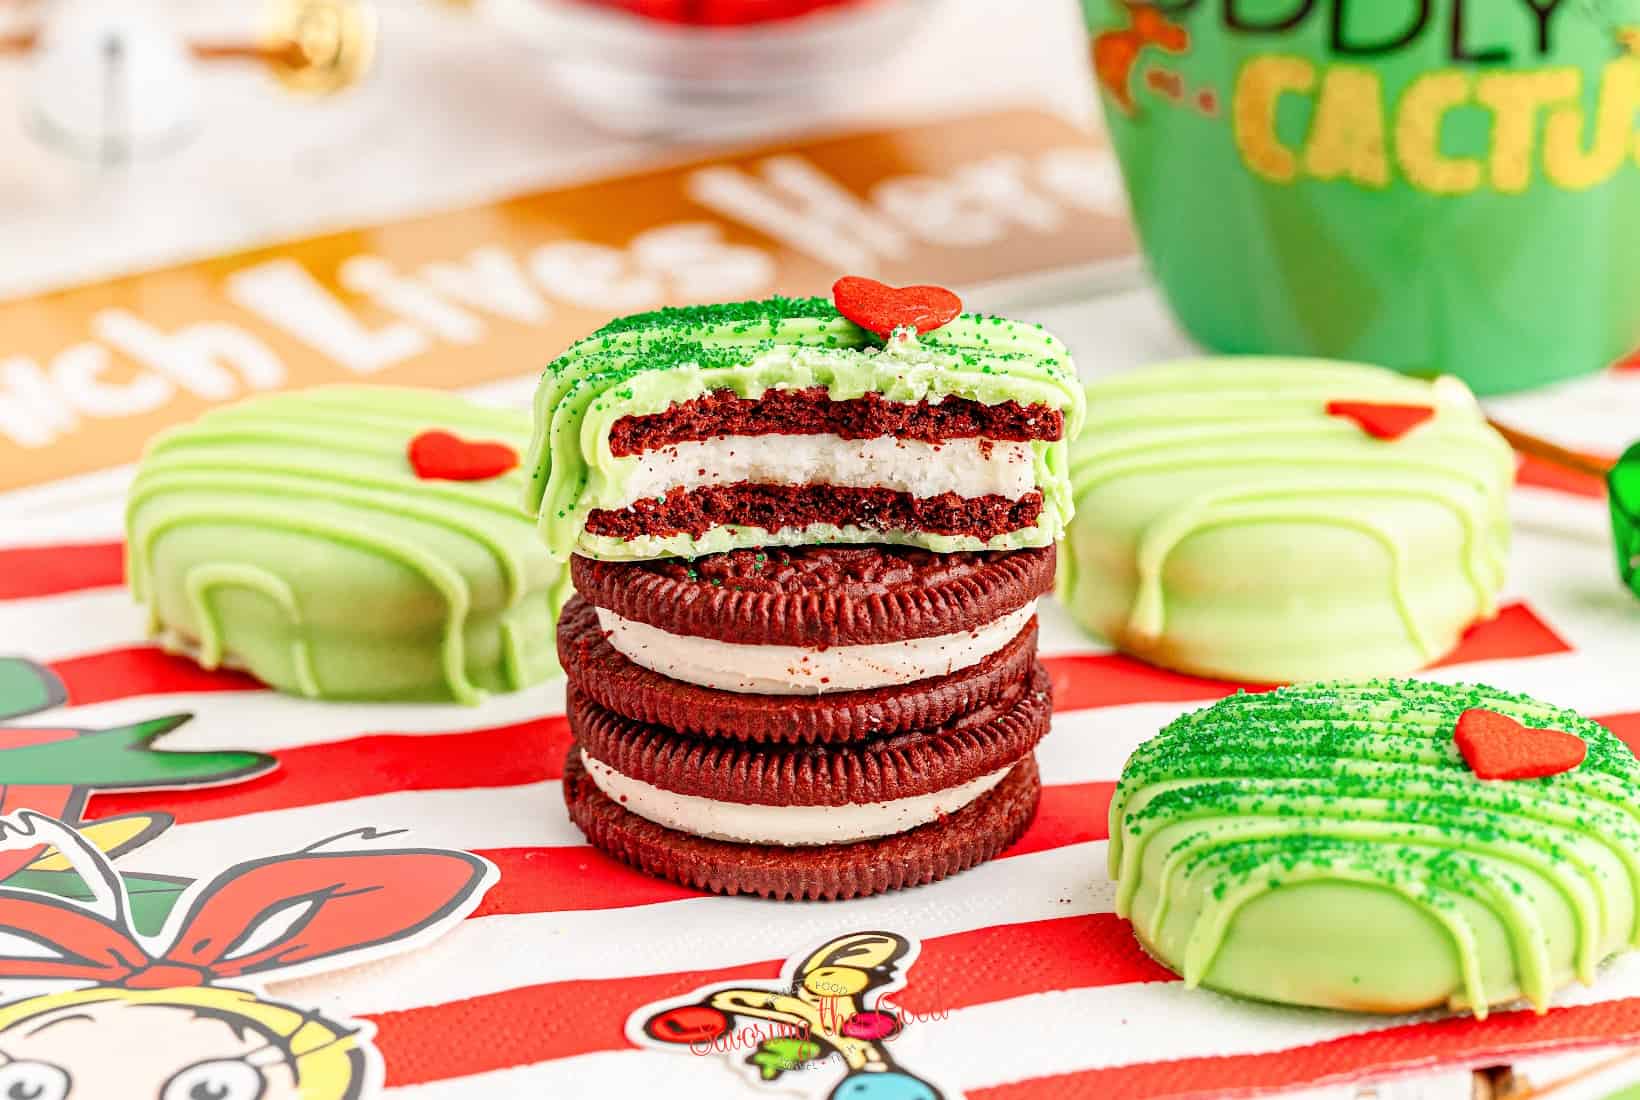 Grinch-inspired Oreo cookies with a green frosting.